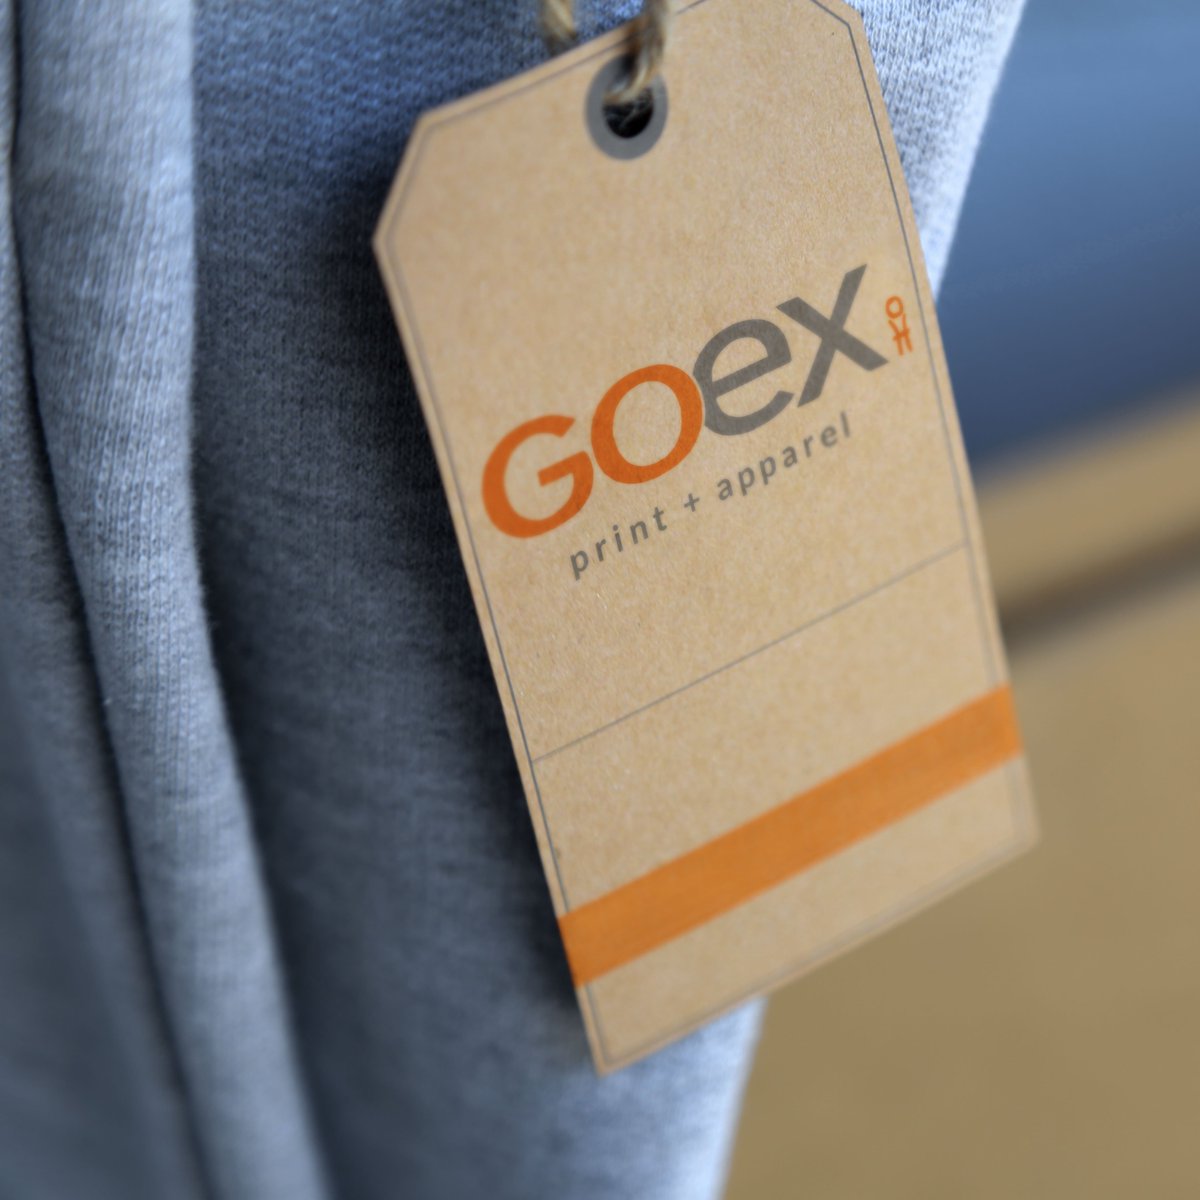 There is a lot in a name. Ever wonder what's behind ours? #GOEX is short for #GOExchange. A name inspired by two actions — going & exchanging. Read the whole story: ow.ly/GYp250uAzq5 #socialchange #fairtrade #commerce